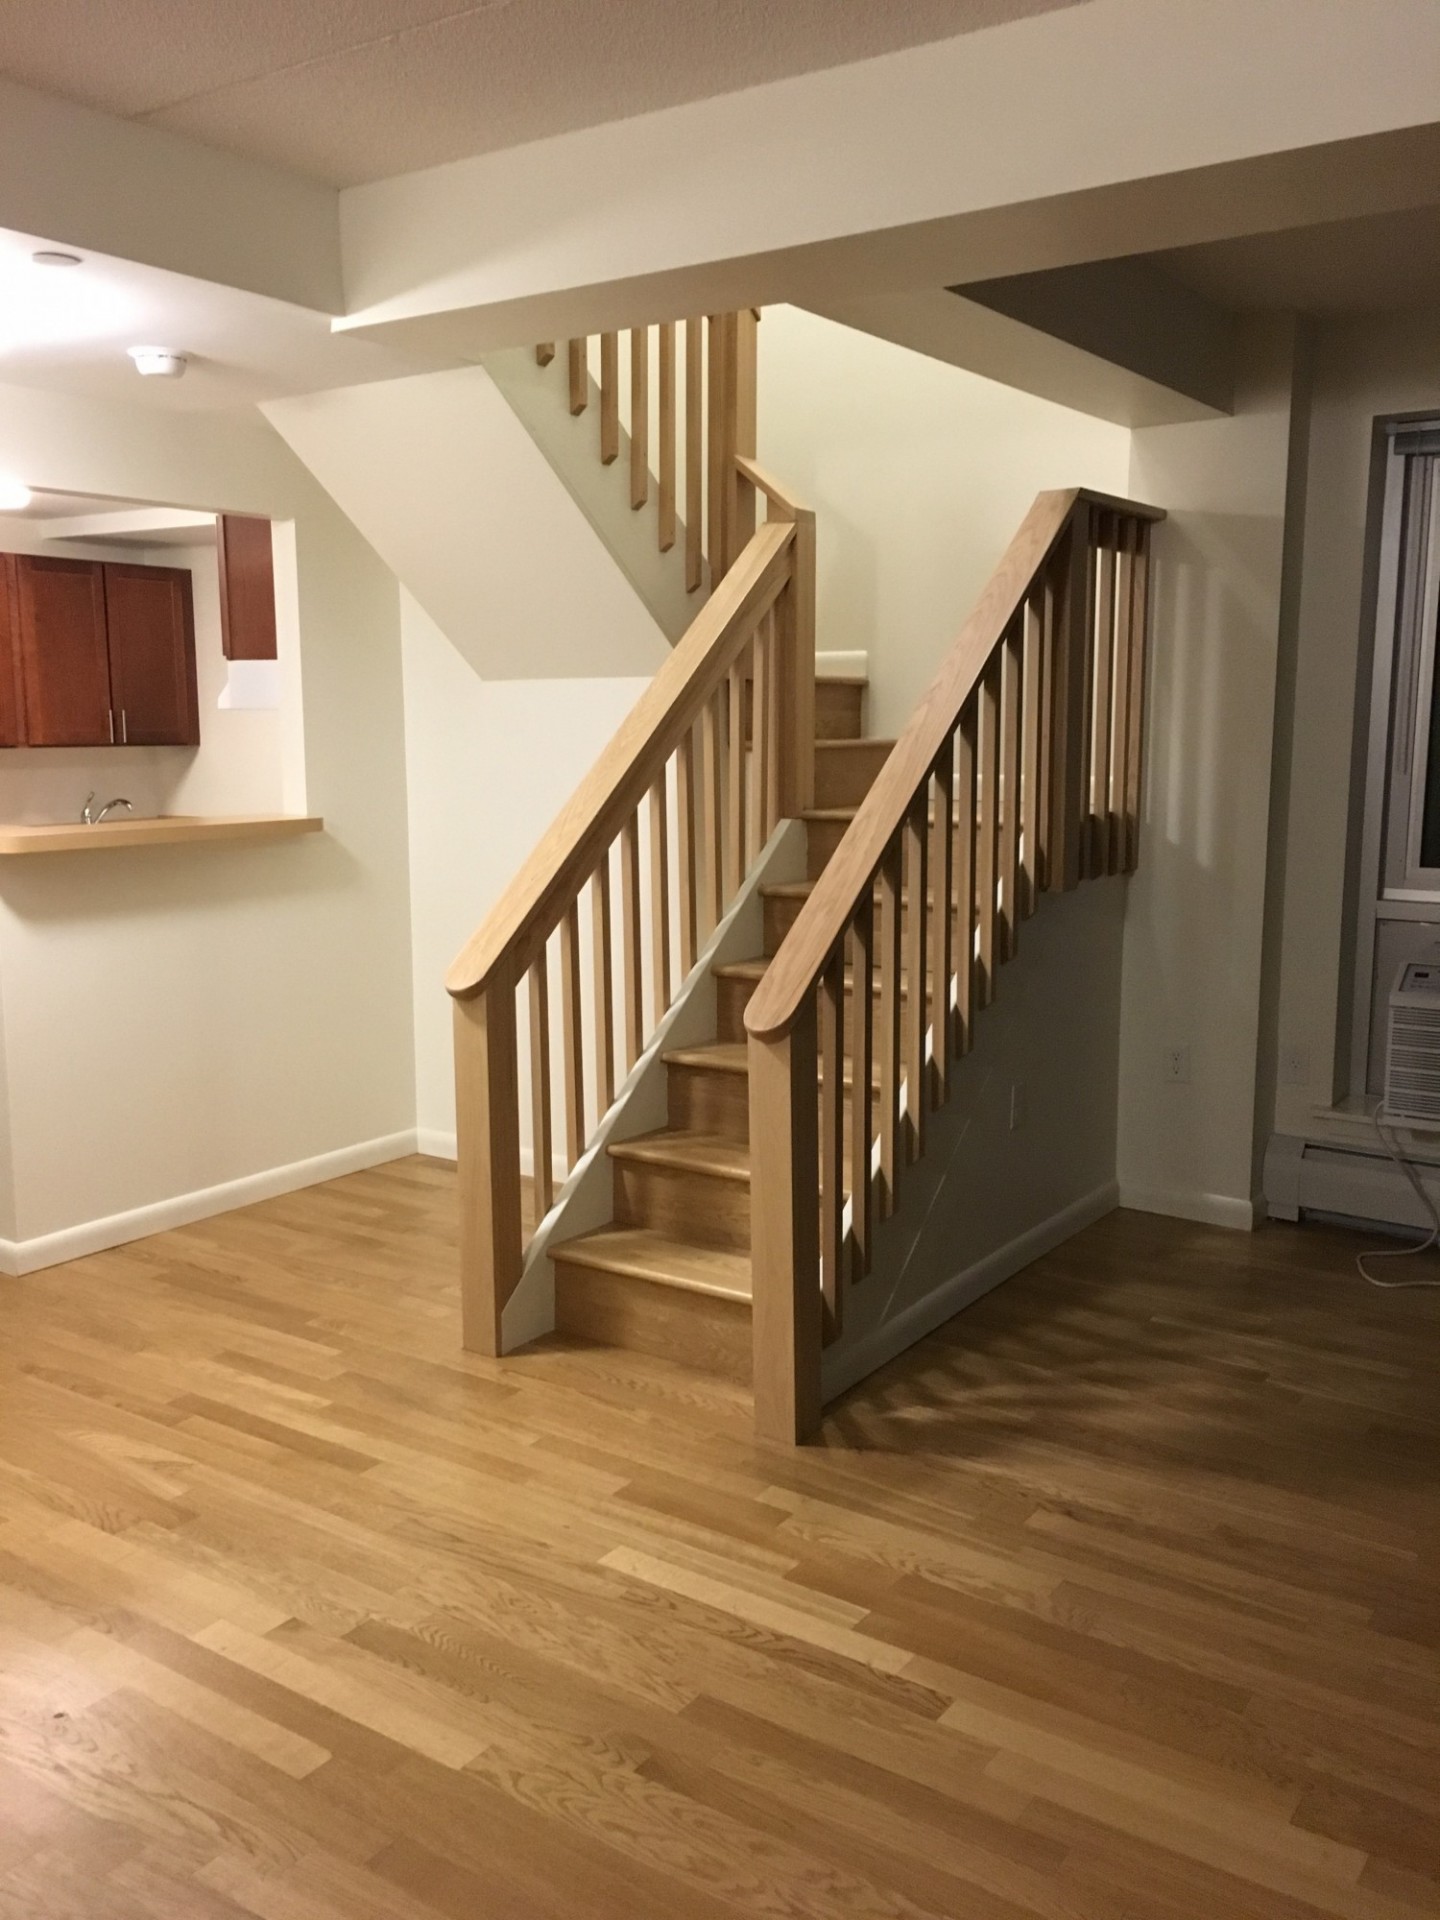 A wooden staircase in the livingroom of a duplex unit.